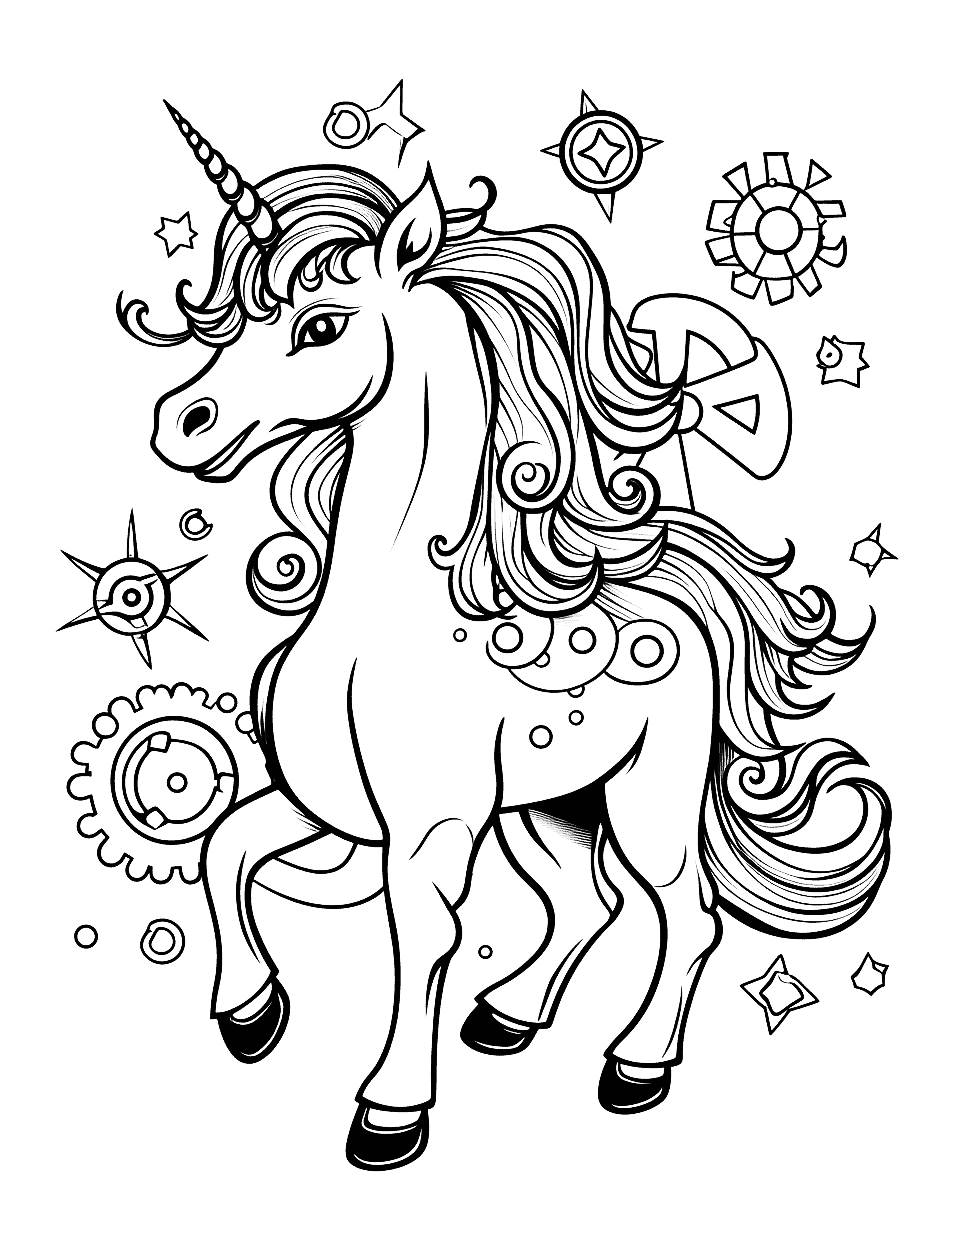 Steampunk Unicorn Coloring Page - A steampunk-inspired unicorn with gears, cogs, and other steampunk elements for a vintage industrial feel.